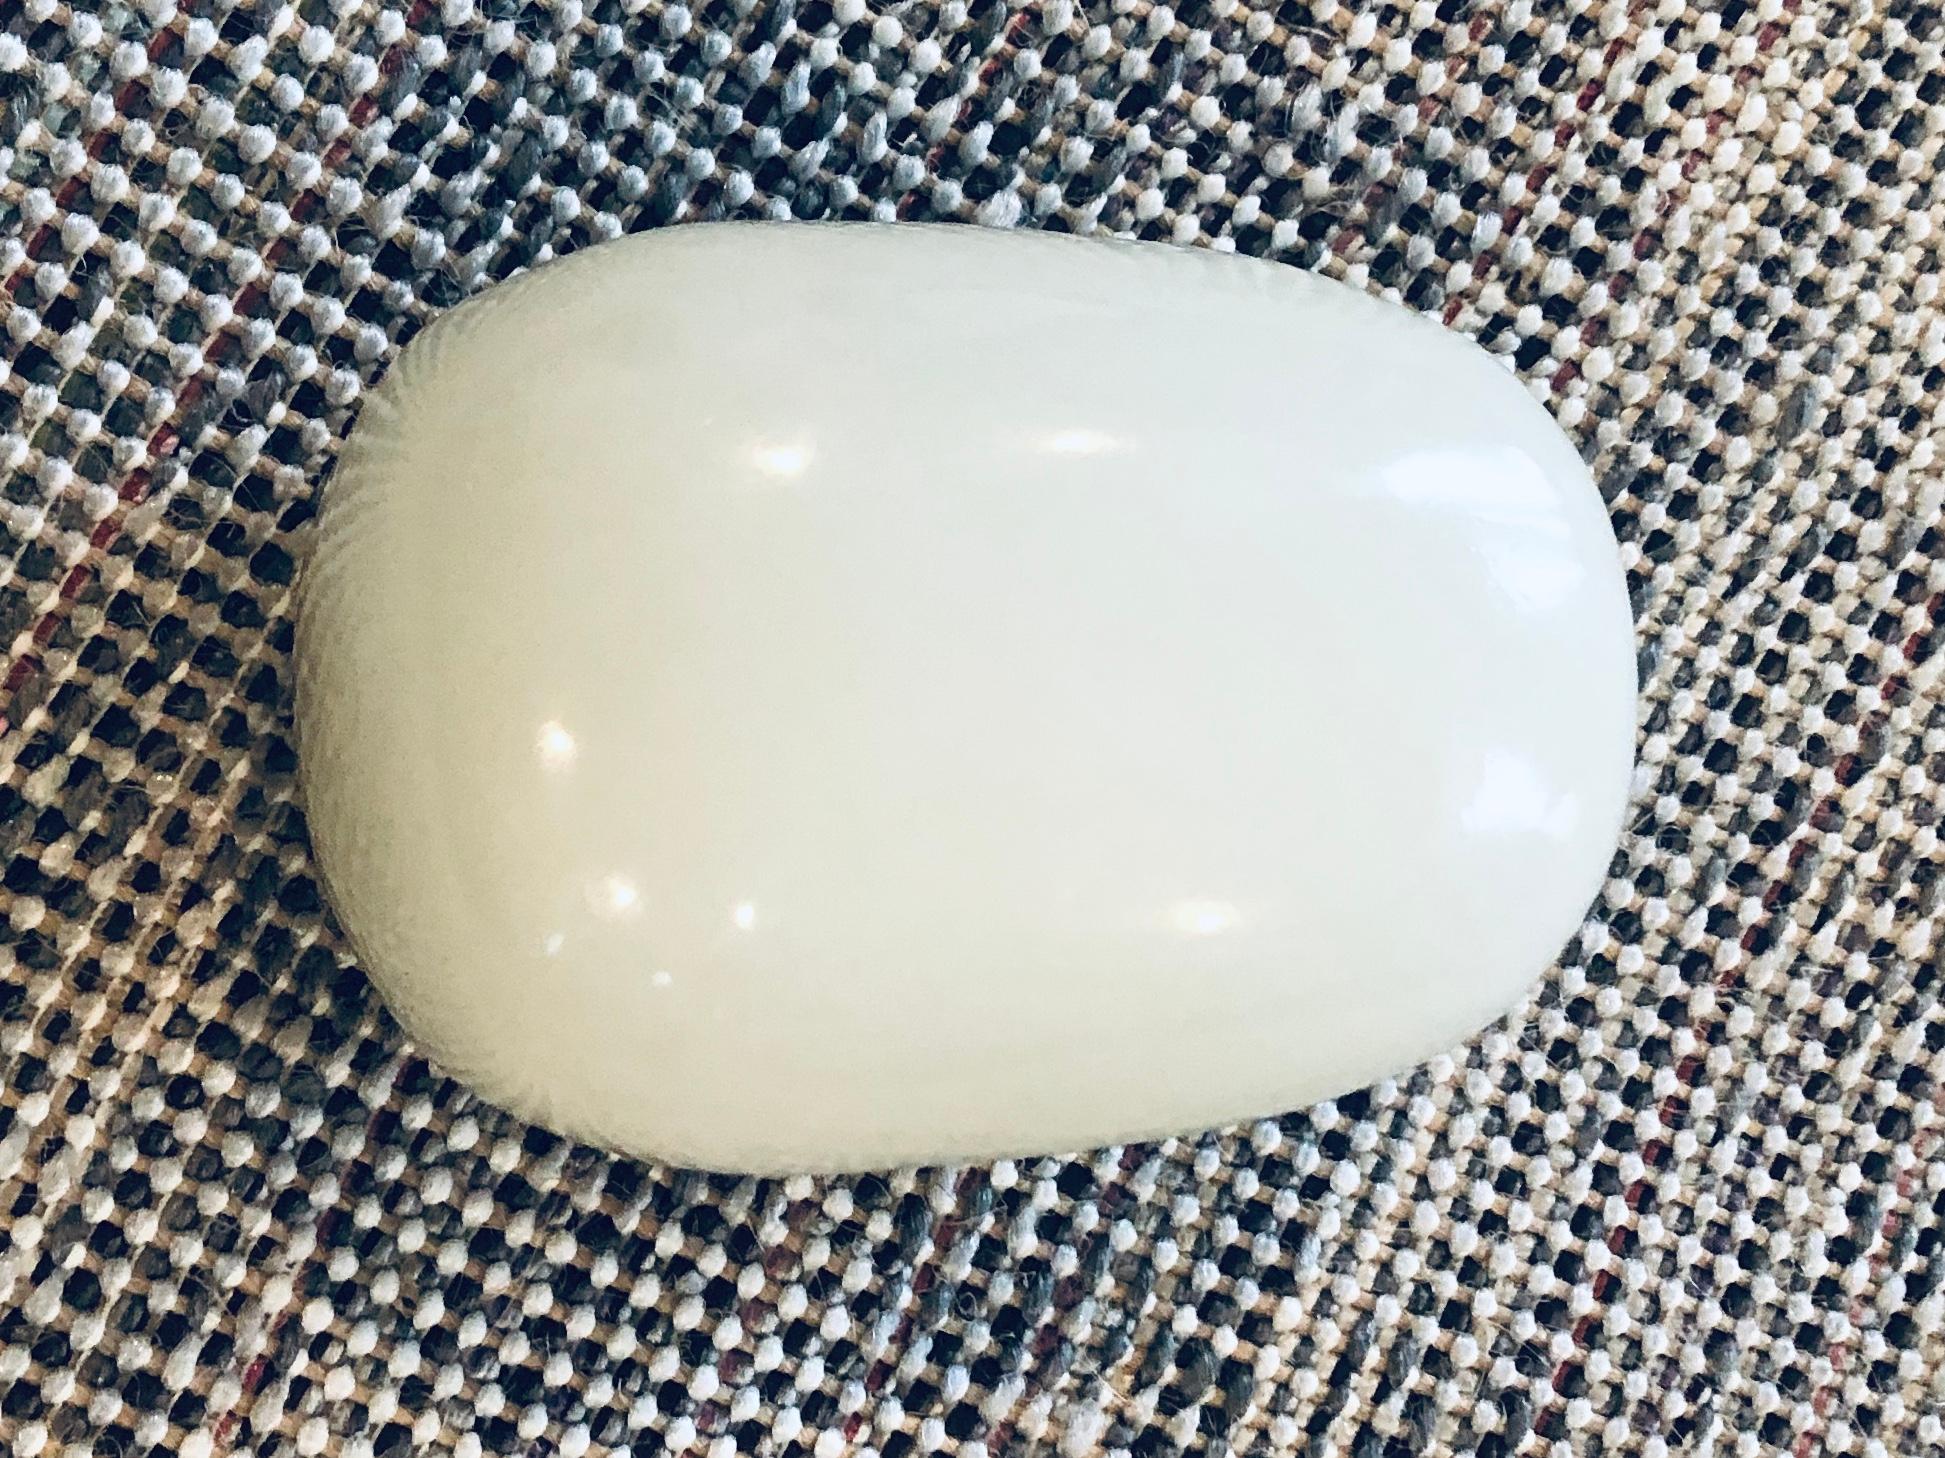 This is an antique Chines White Jade stone that has two small holes in the top where you can fit a cord. Chinese people often carry such an energy stone in their pocket and take it wherever they go. The most beautiful ones are made out of clear